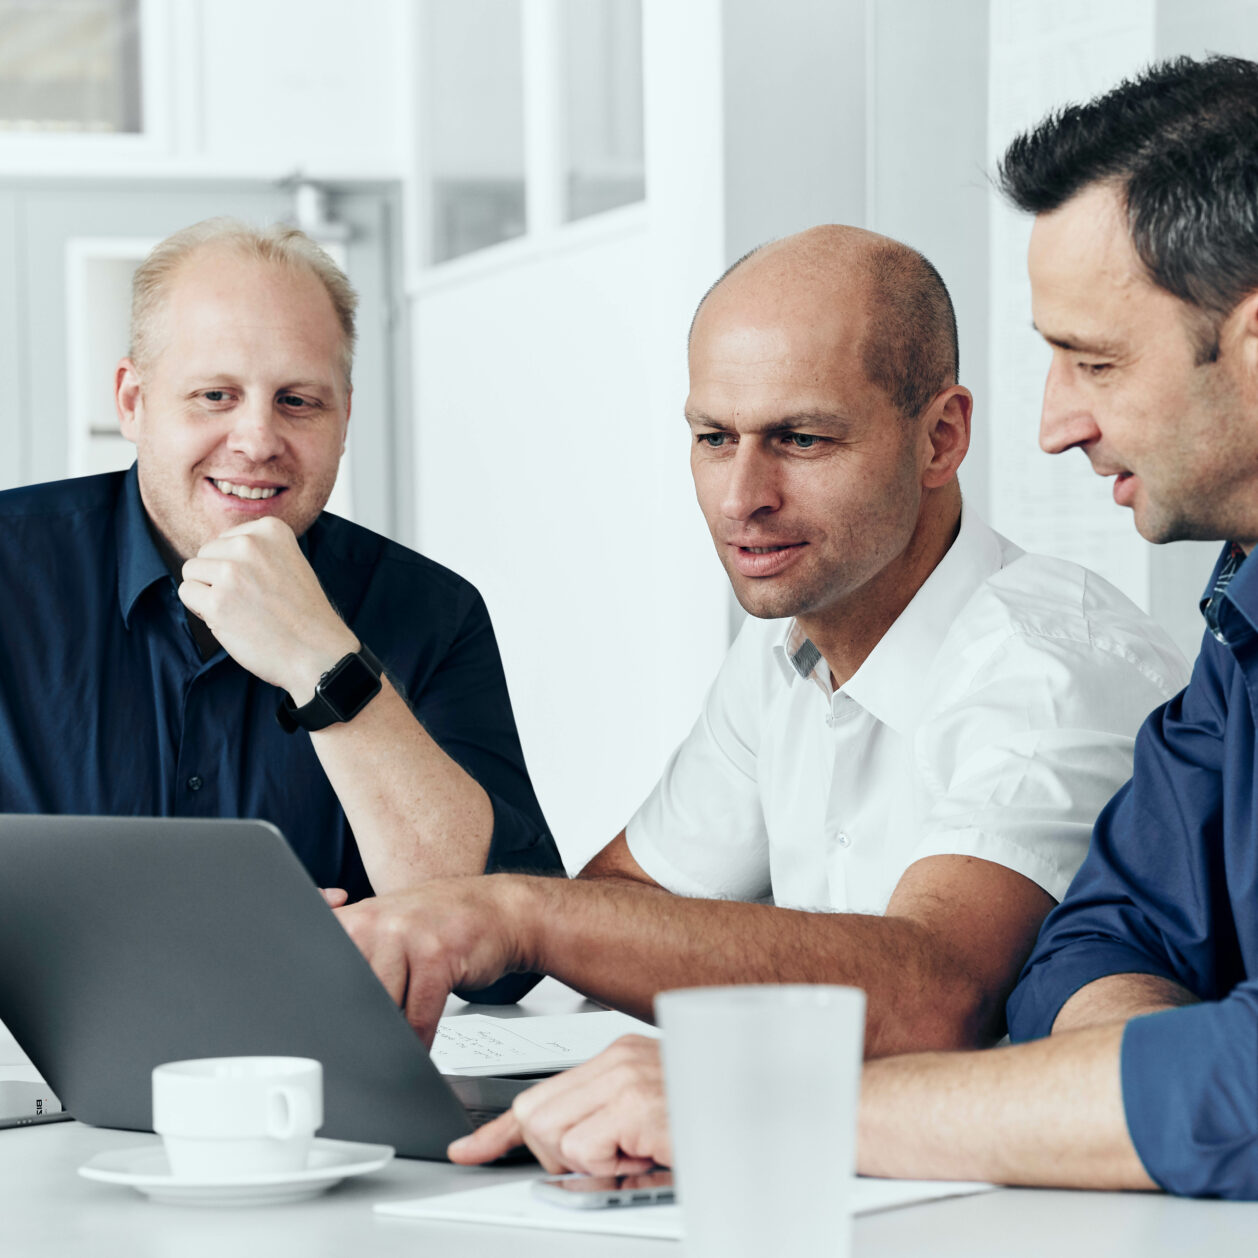 Photo of 3 Bizerba employees discussing a presentation on a laptop.